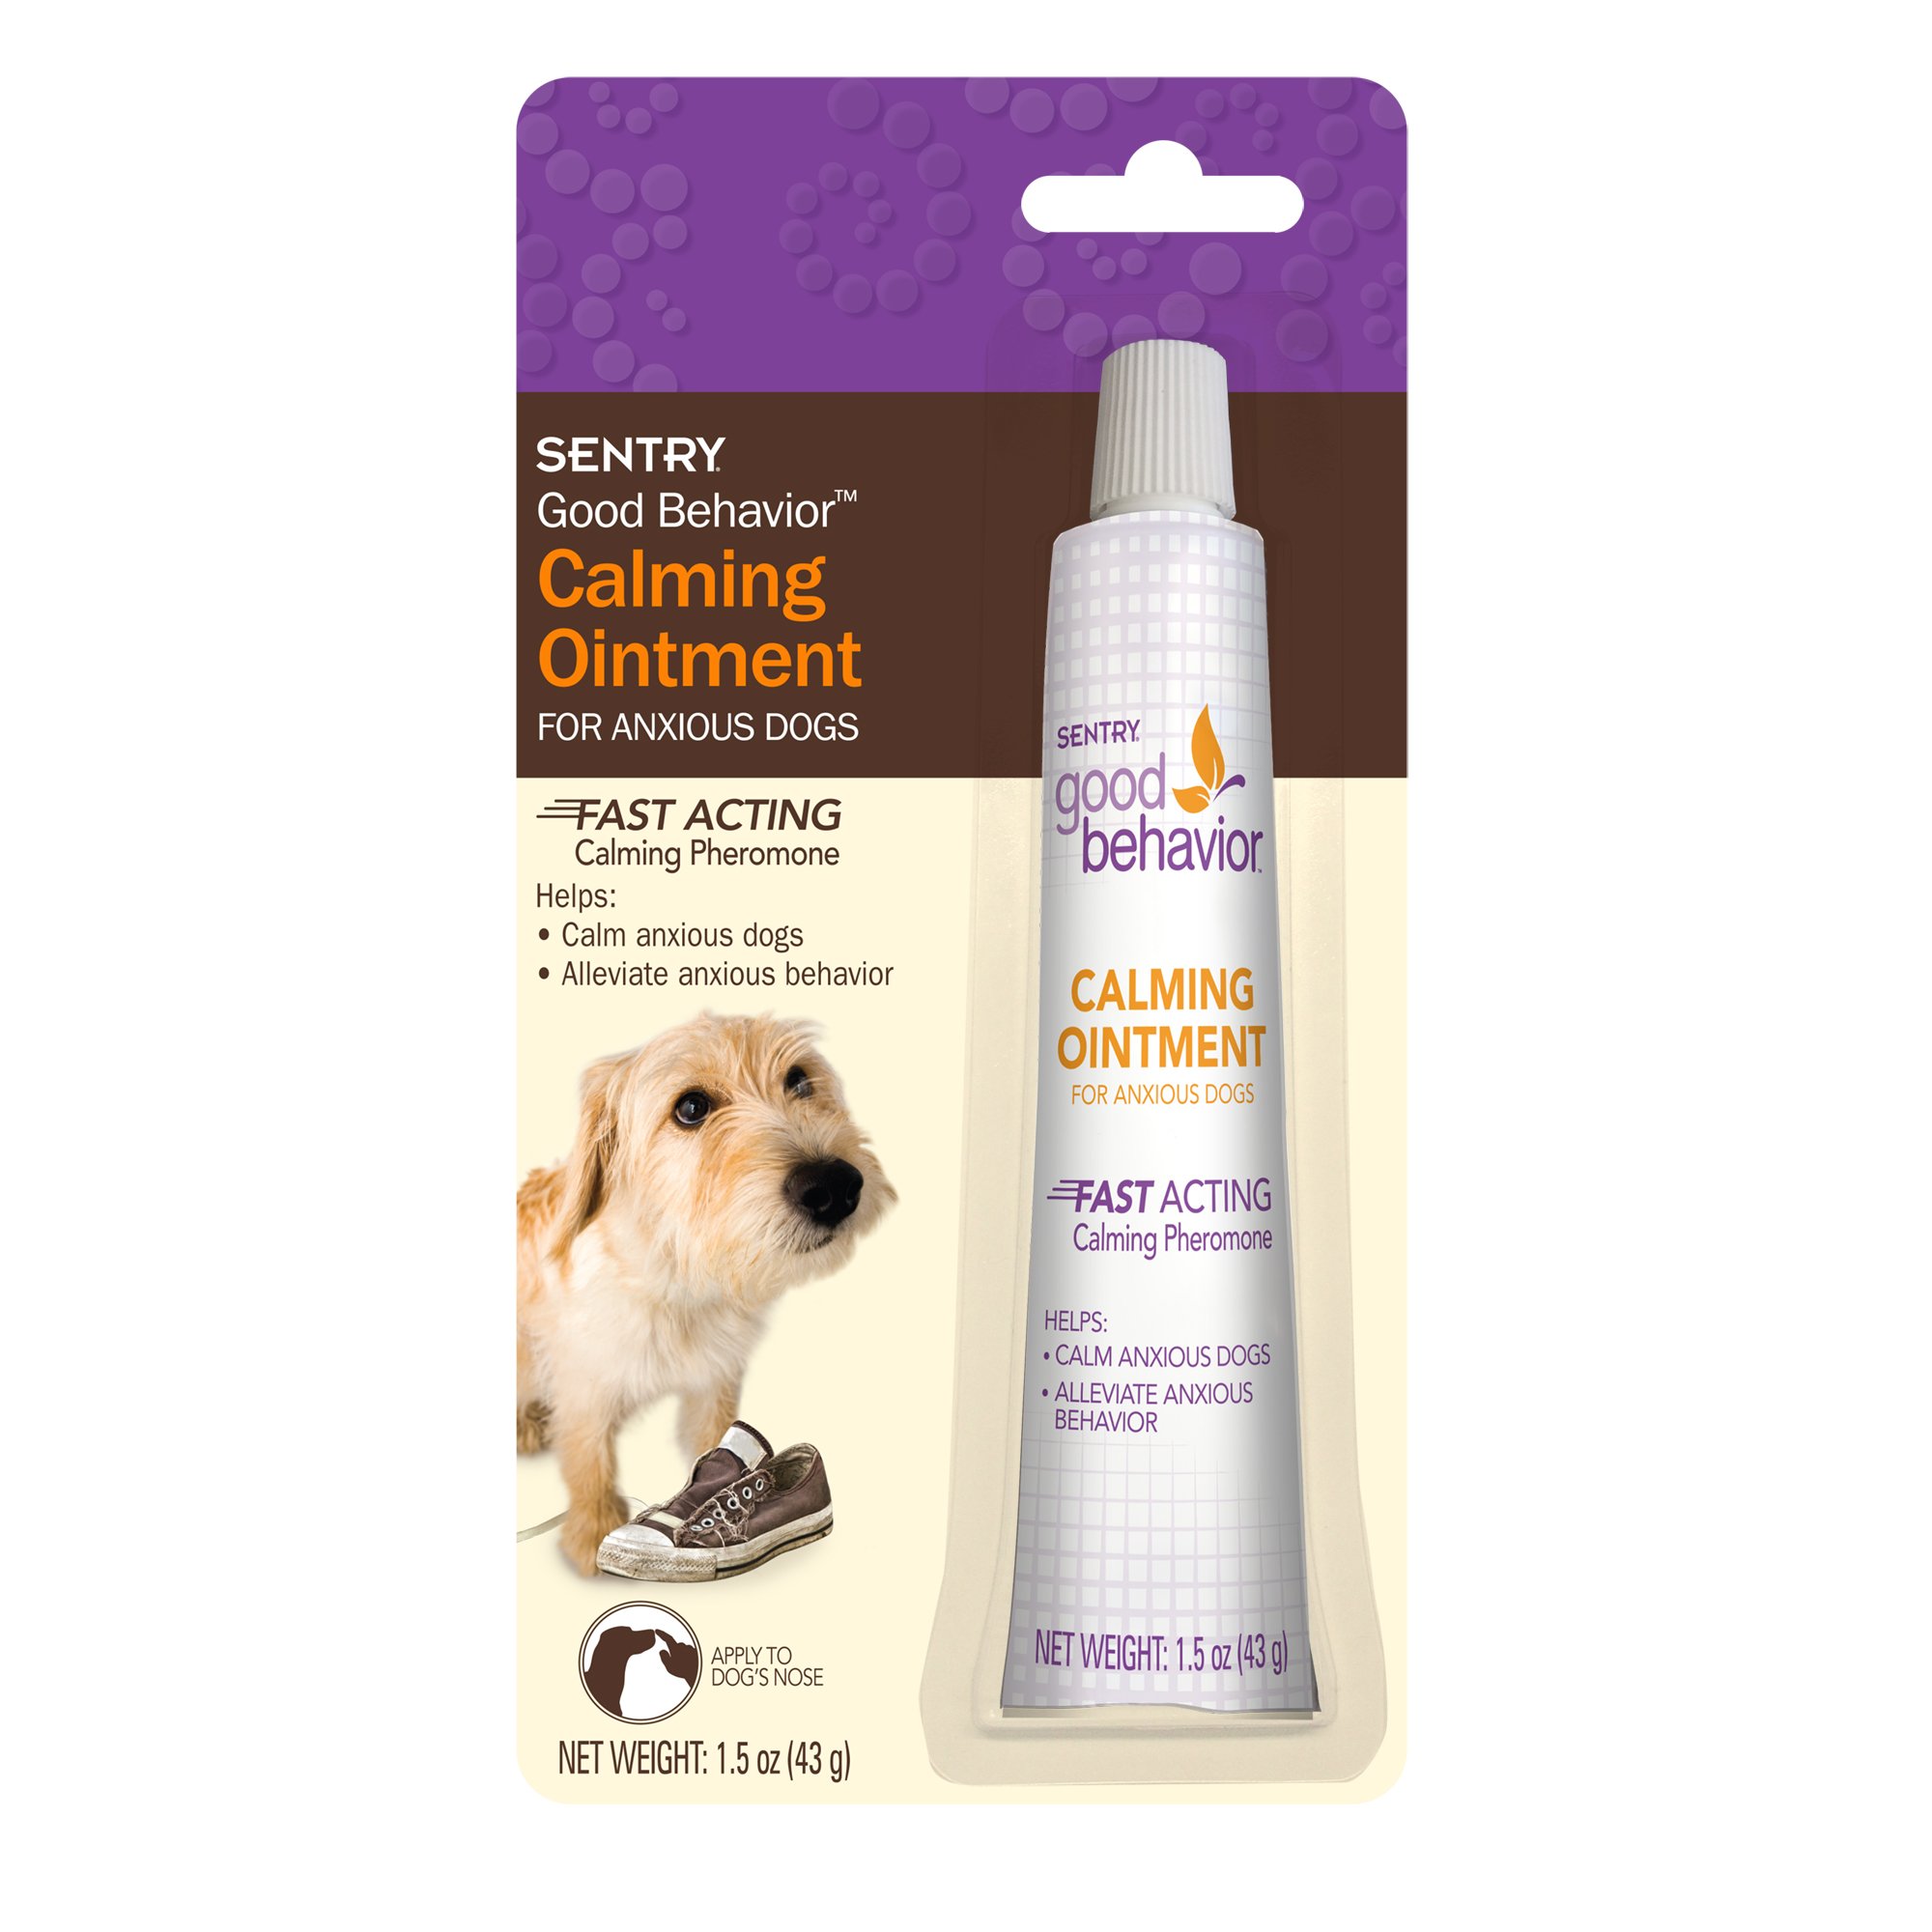 SENTRY Good Behavior Calming Ointment for Anxious Dogs Petco